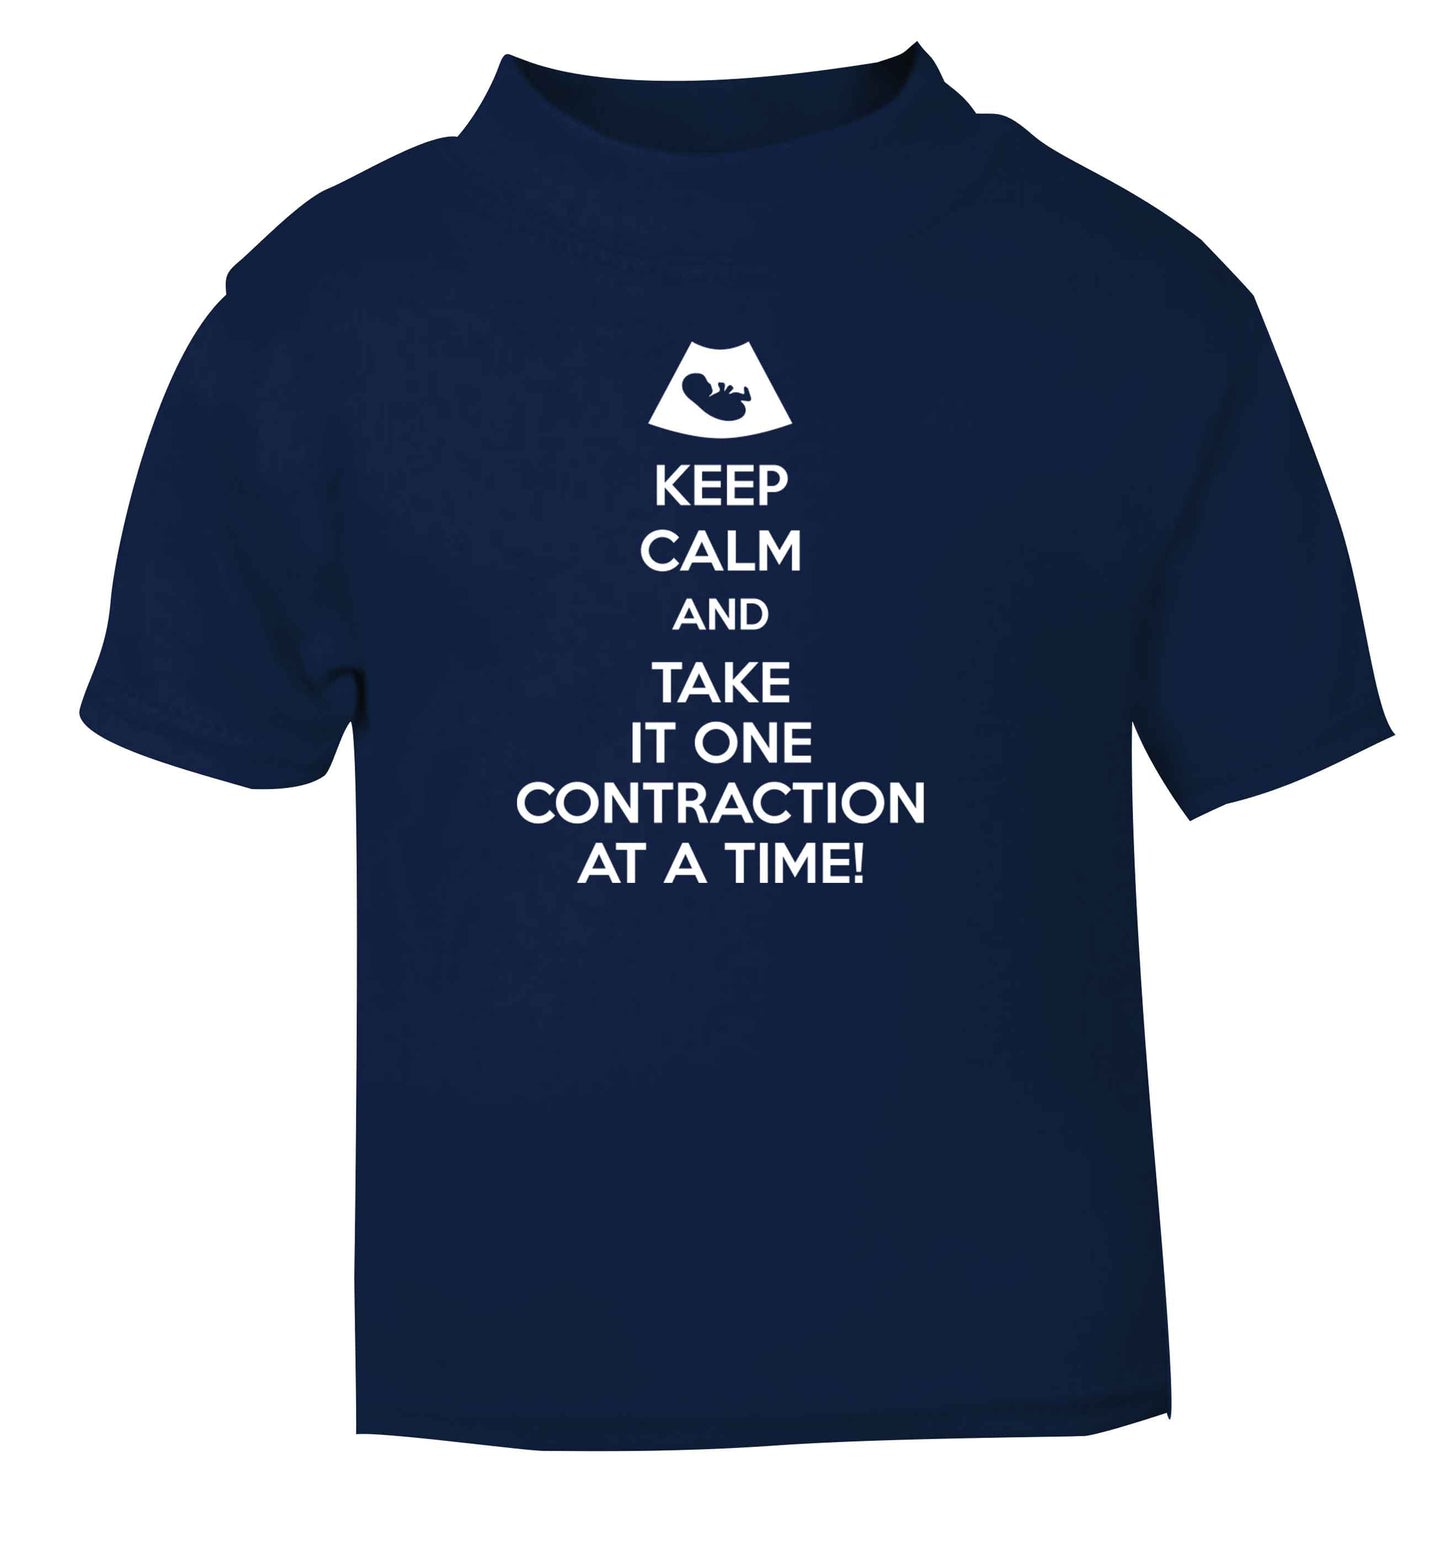 Keep calm and take it one contraction at a time navy Baby Toddler Tshirt 2 Years